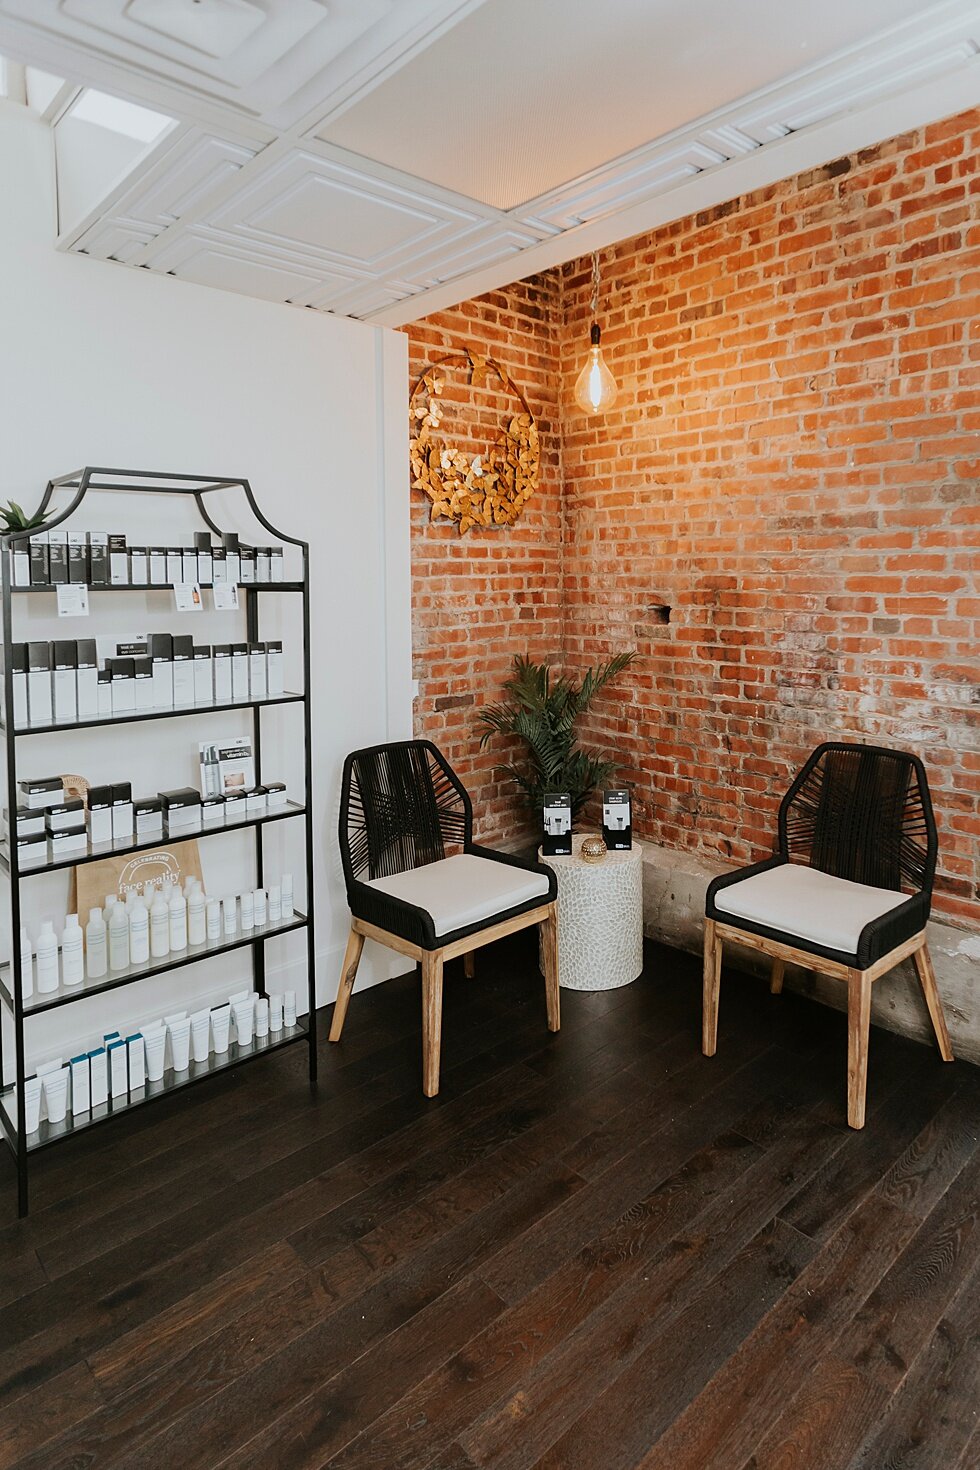  Waiting area for Skincare Boutique branding photography session for Skintuition in Louisville, Kentucky. clean lines modern boutique skincare health branding wellness selfcare gold black spa dermaplaning aesthetician specialty#branding #brandingsess